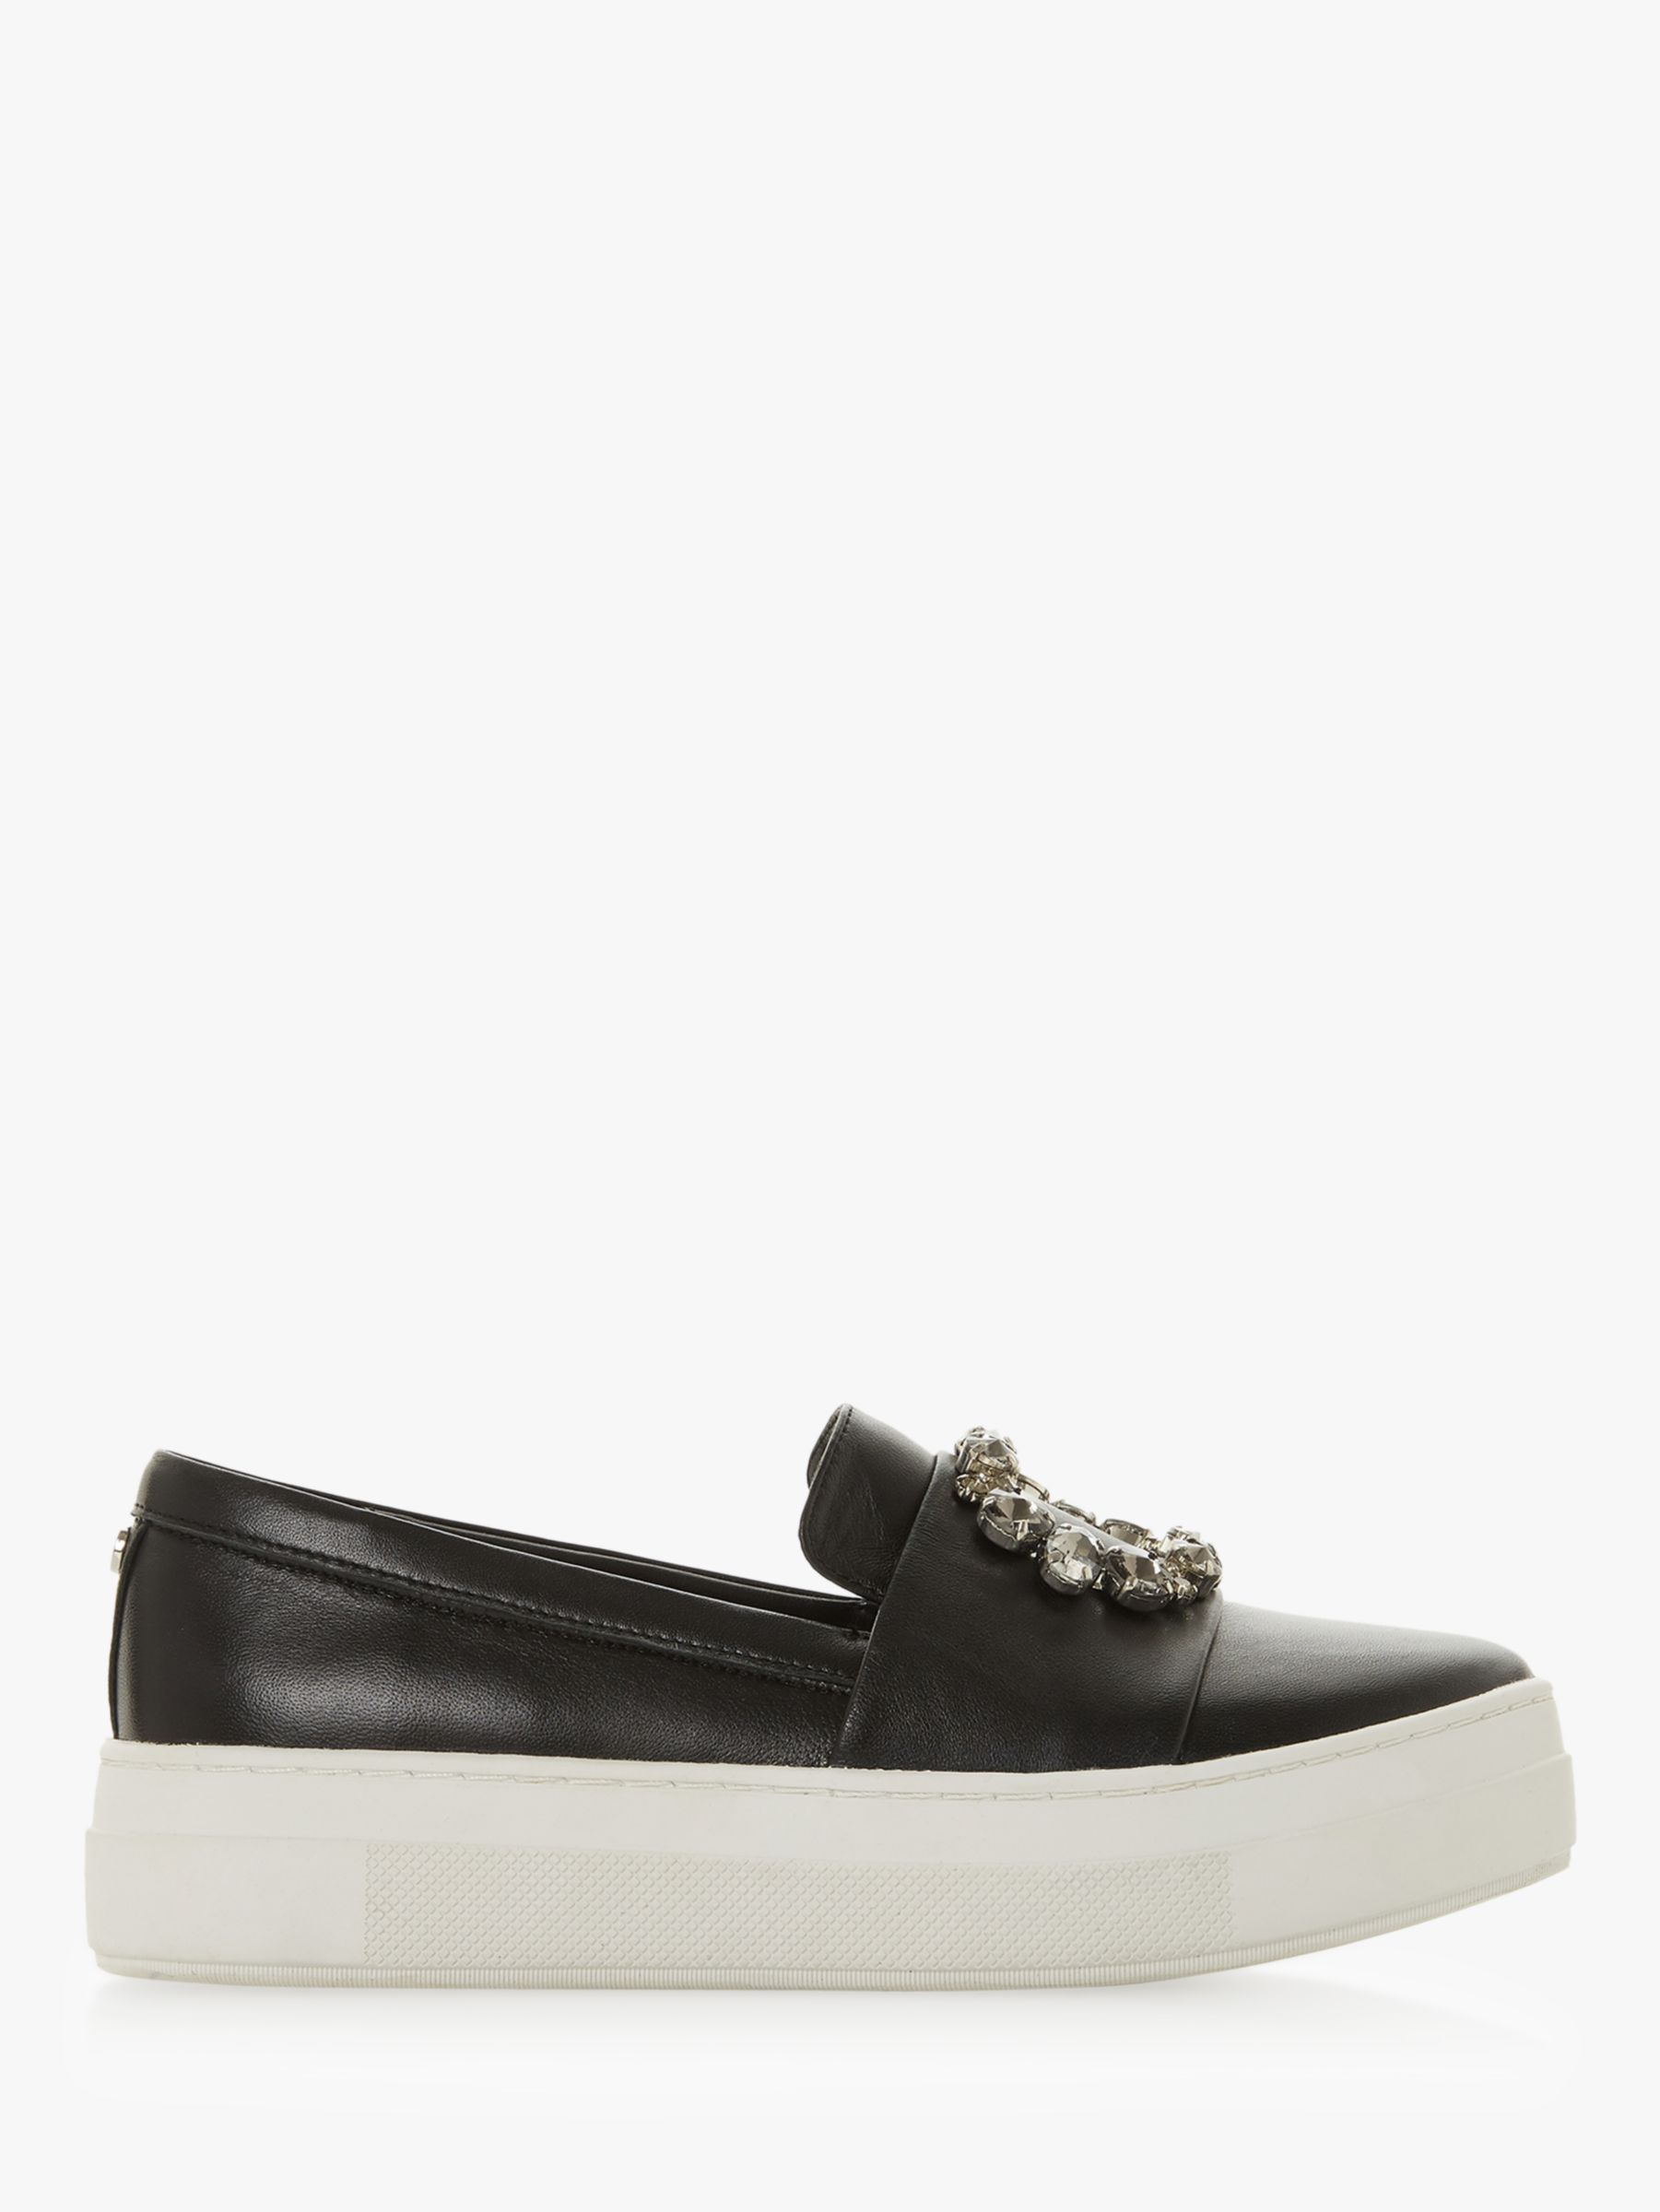 Dune Elston Leather Platform Jewelled Loafer Trainers